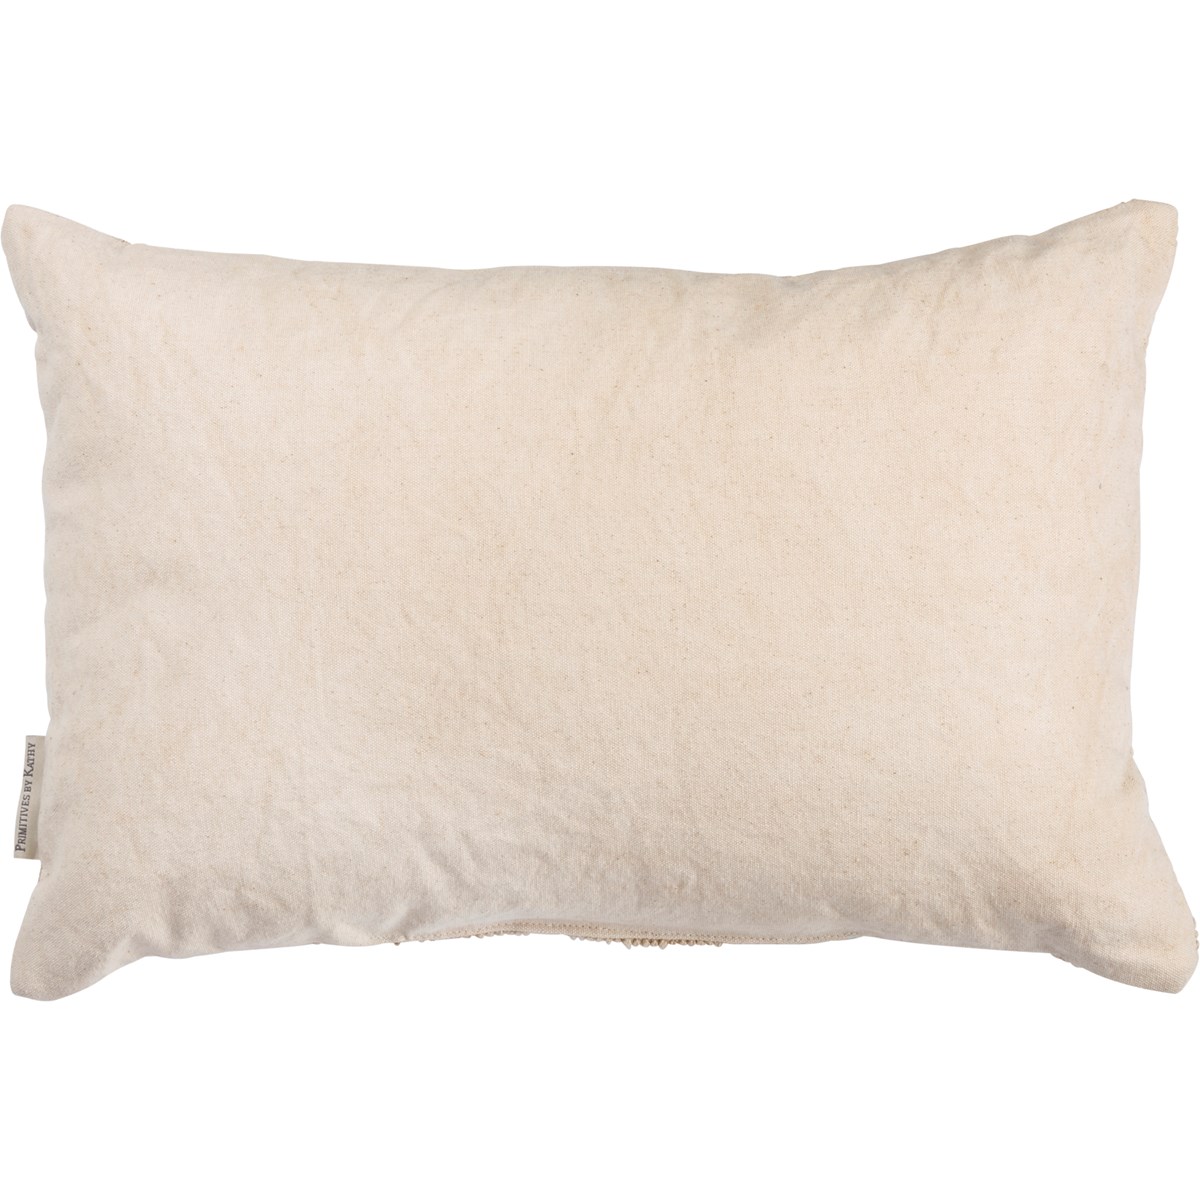 Give Thanks Knobby Pillow - Cotton, Canvas, Zipper